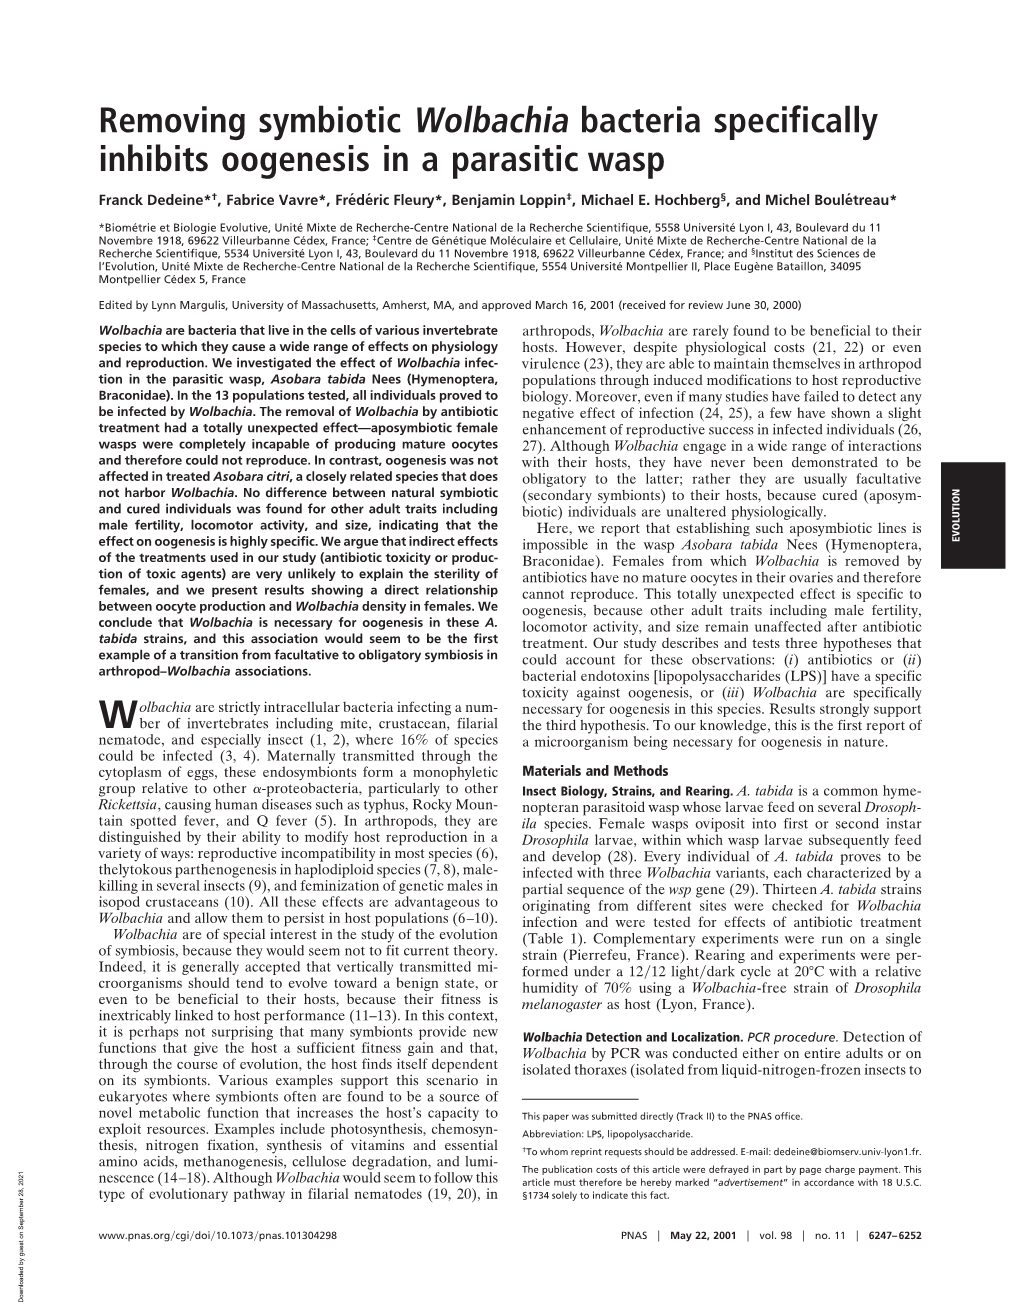 Removing Symbiotic Wolbachia Bacteria Specifically Inhibits Oogenesis in a Parasitic Wasp